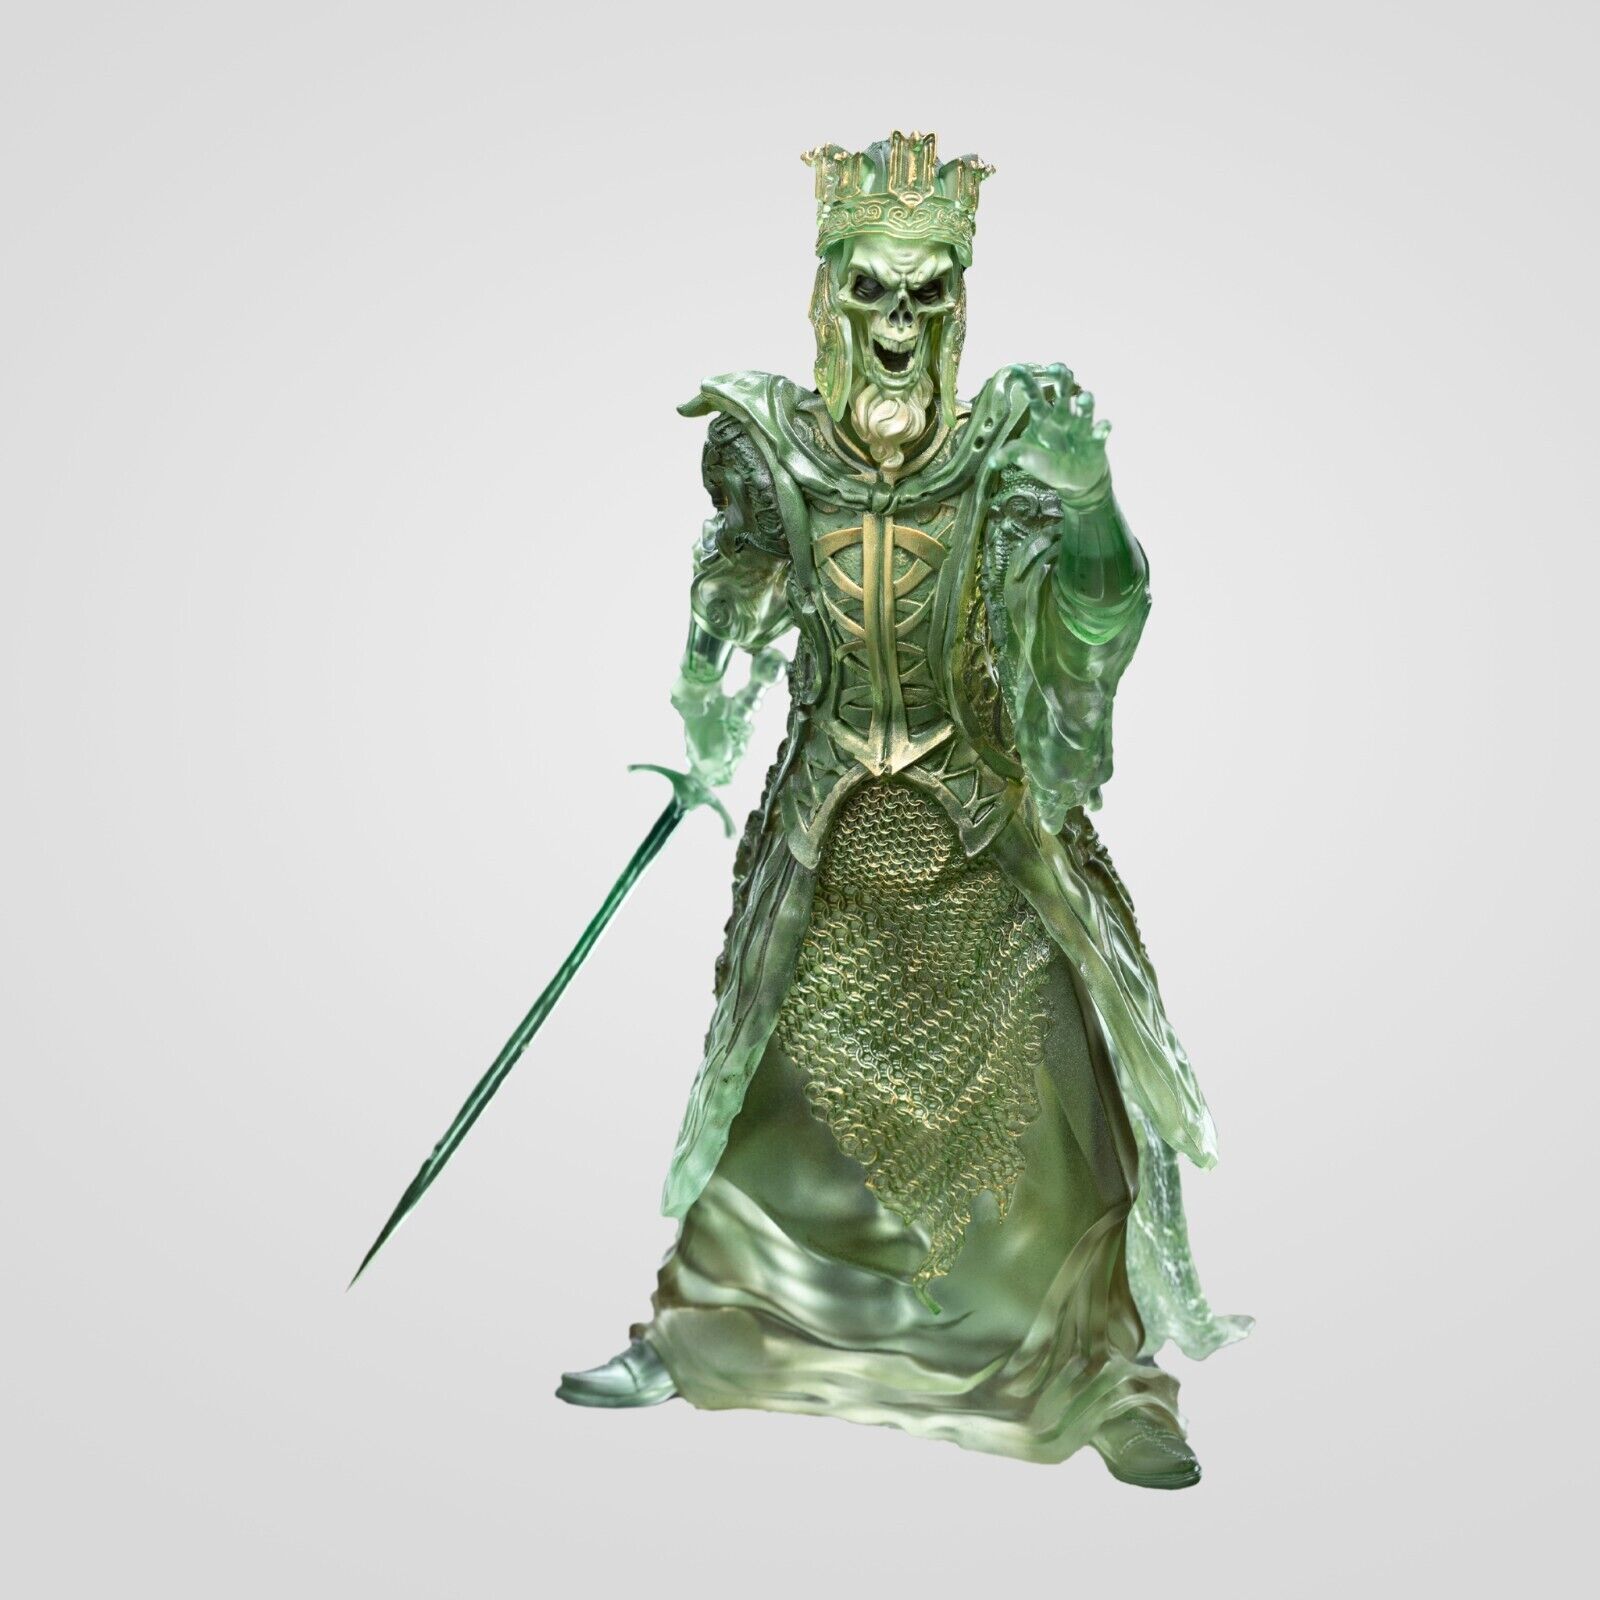 King of the Dead (Lord of the Rings) Mini Epics Statue Transparent Version